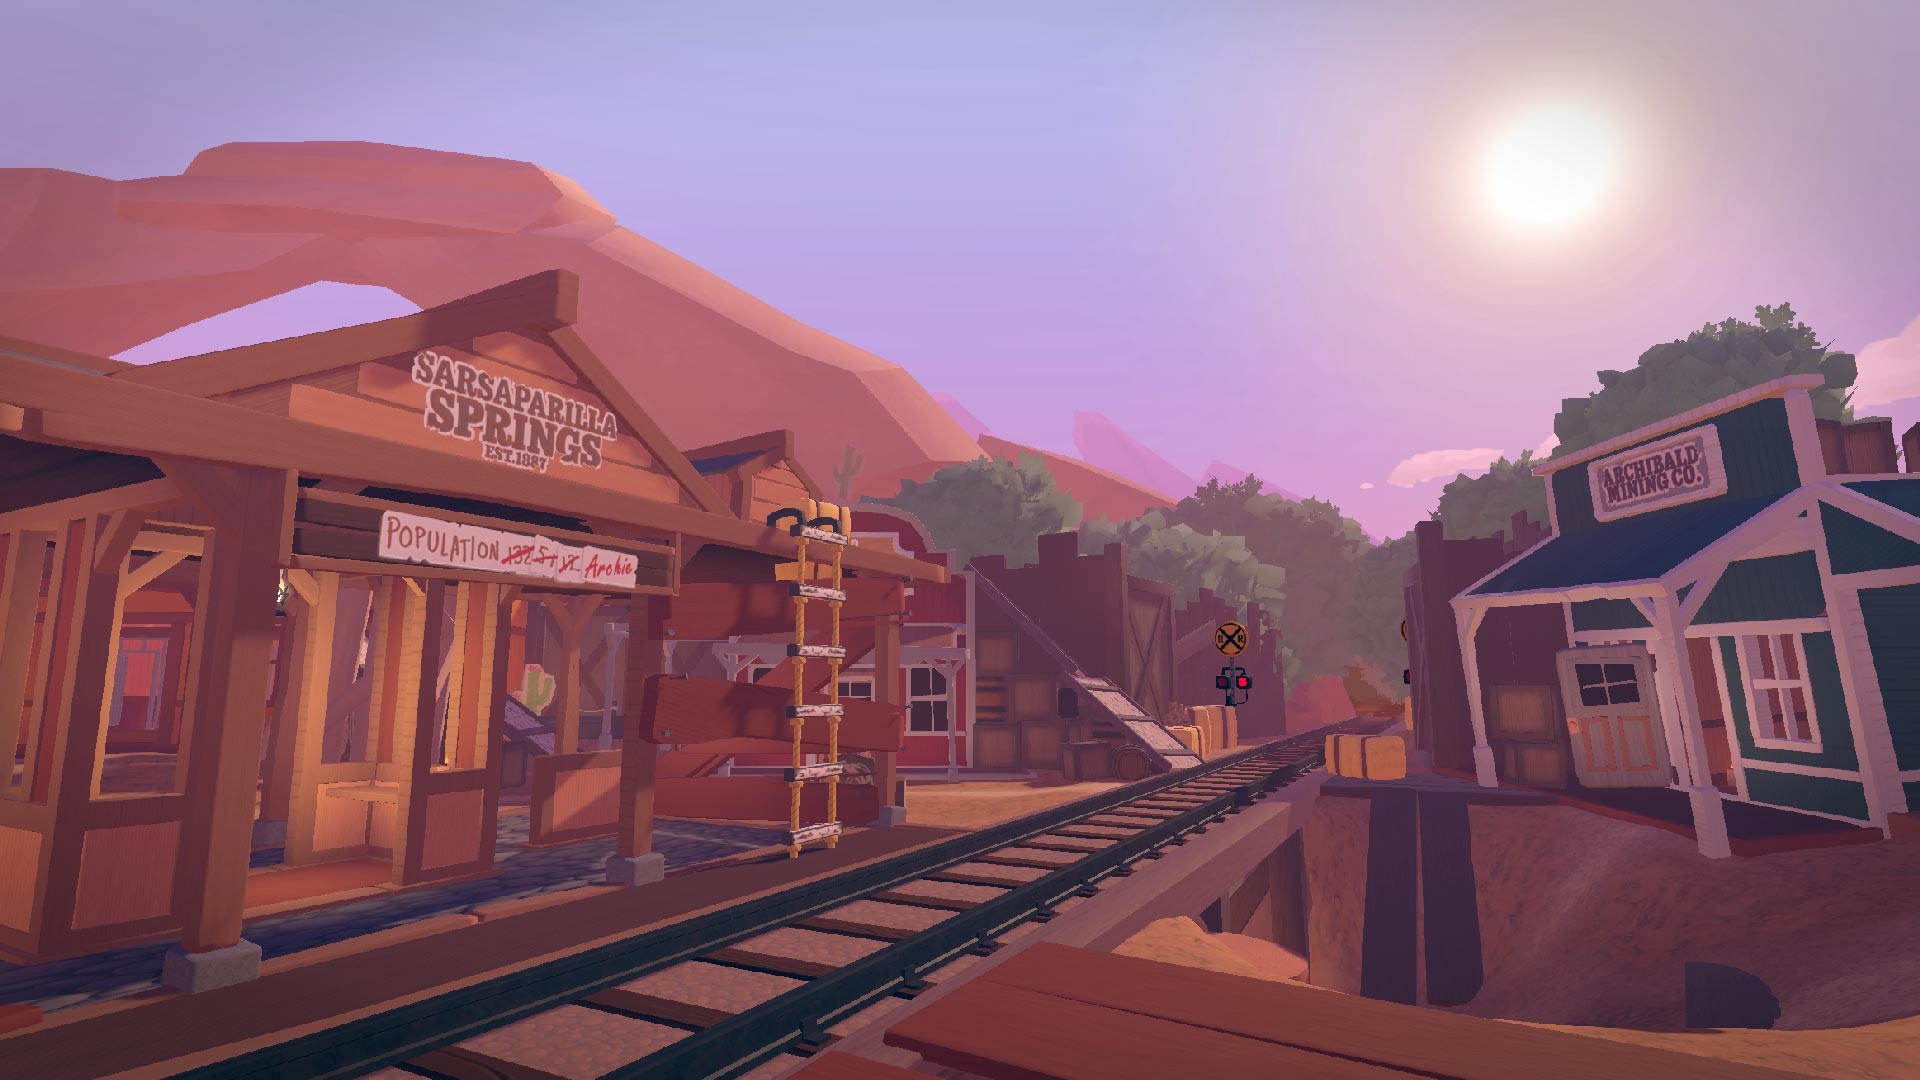 Rec Room' Launches Western-style Shooter Today with 'Showdown